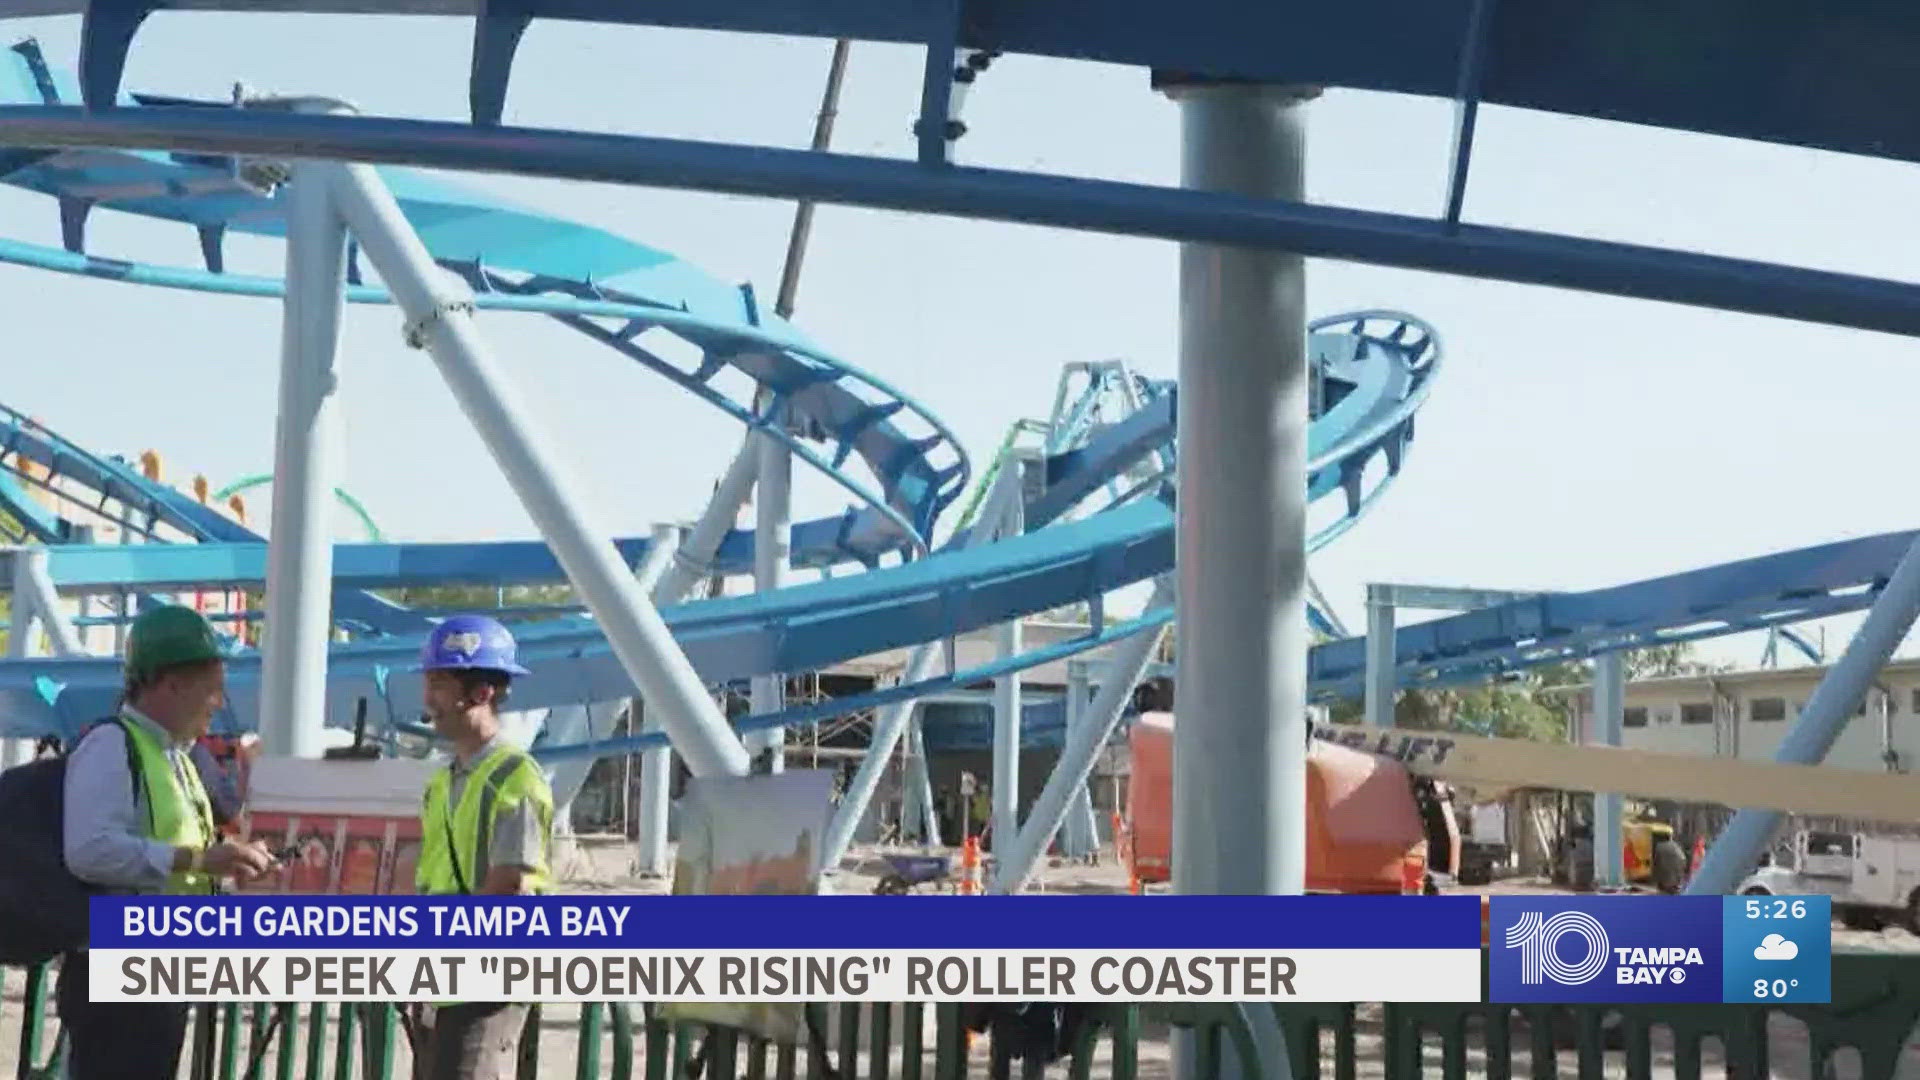 Crews are putting the final touches on the ride. An opening date is expected to be announced in the coming months.